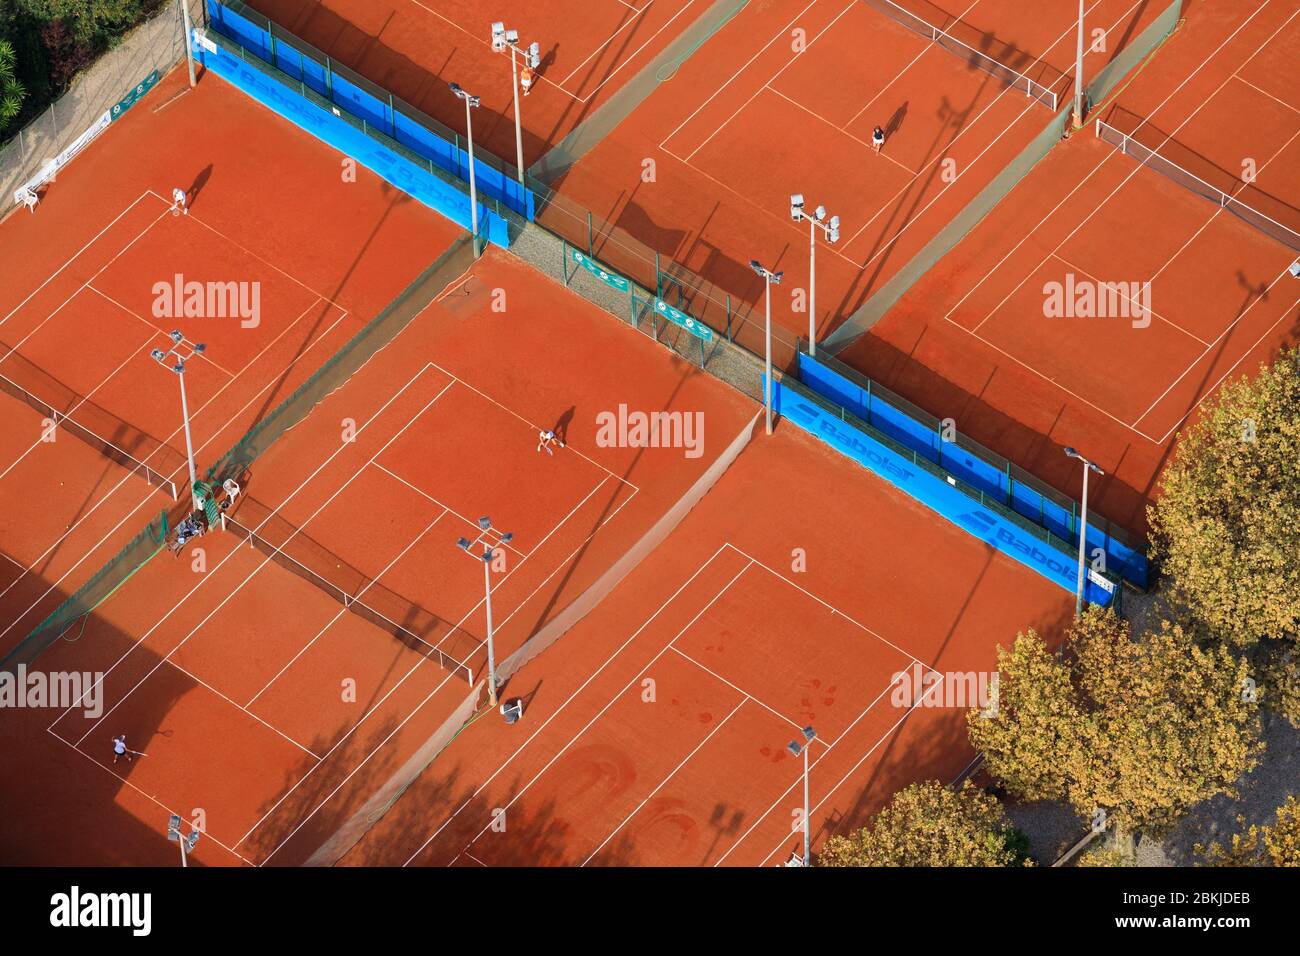 France, Bouches du Rhone, Marseille, 8th arrondissement, Perier district,  Club William tennis court, clay courts (aerial view Stock Photo - Alamy